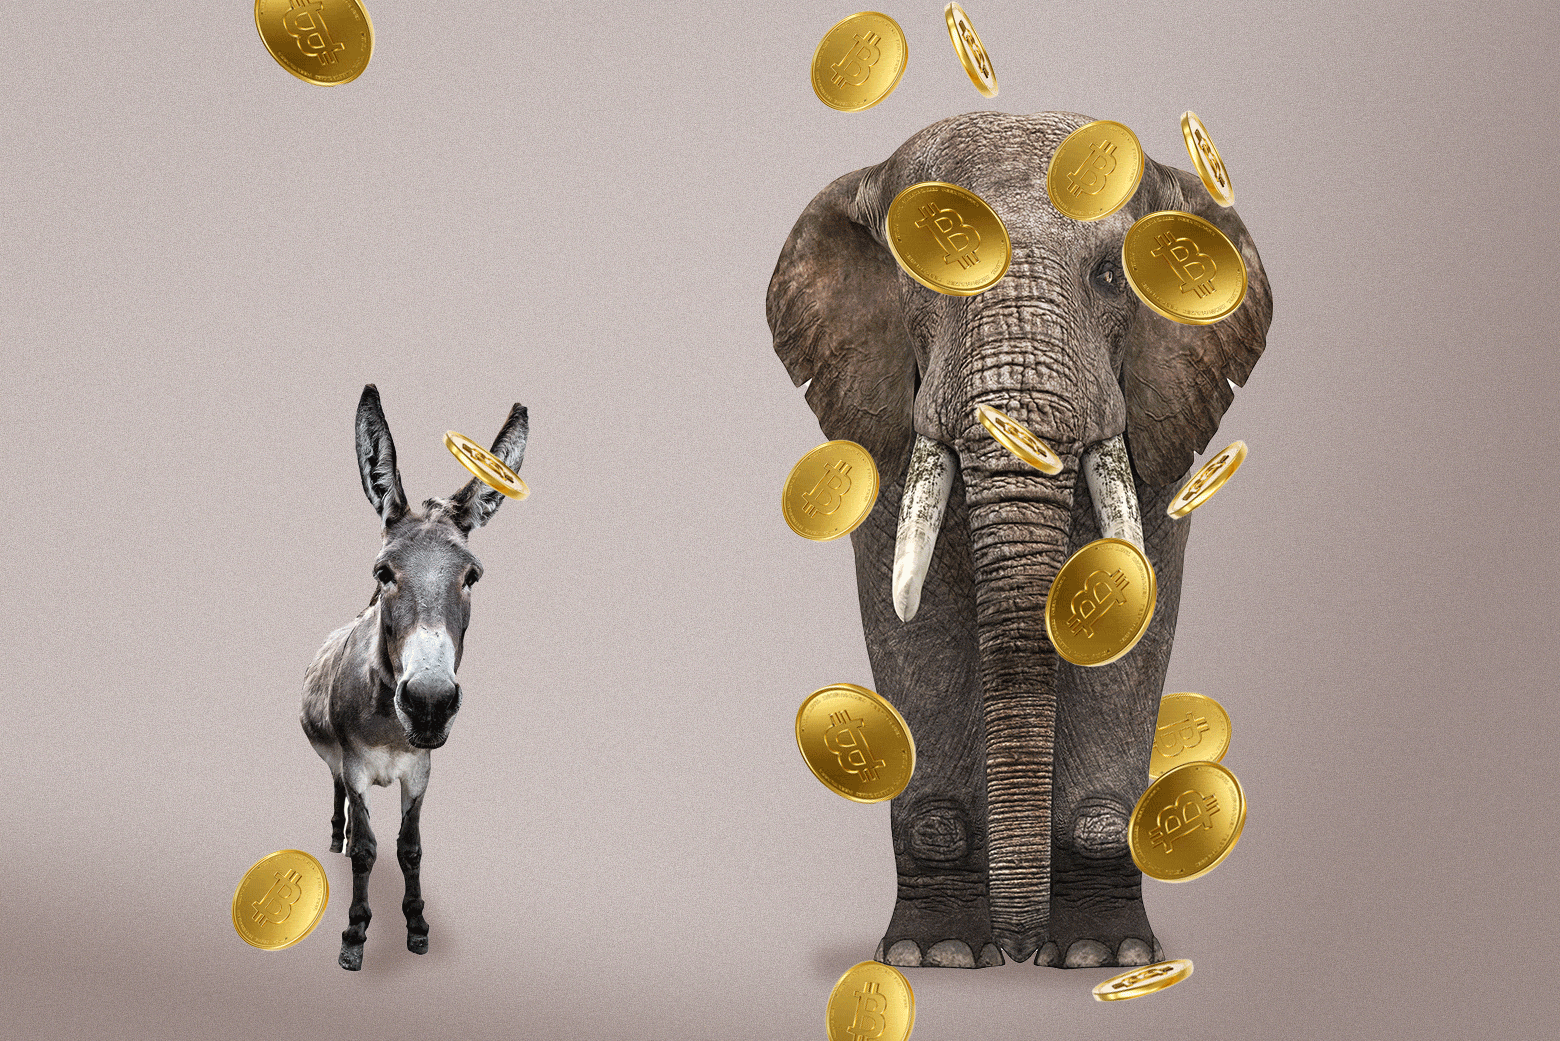 A tiny donkey and a large elephant are showered with golden Bitcoins.